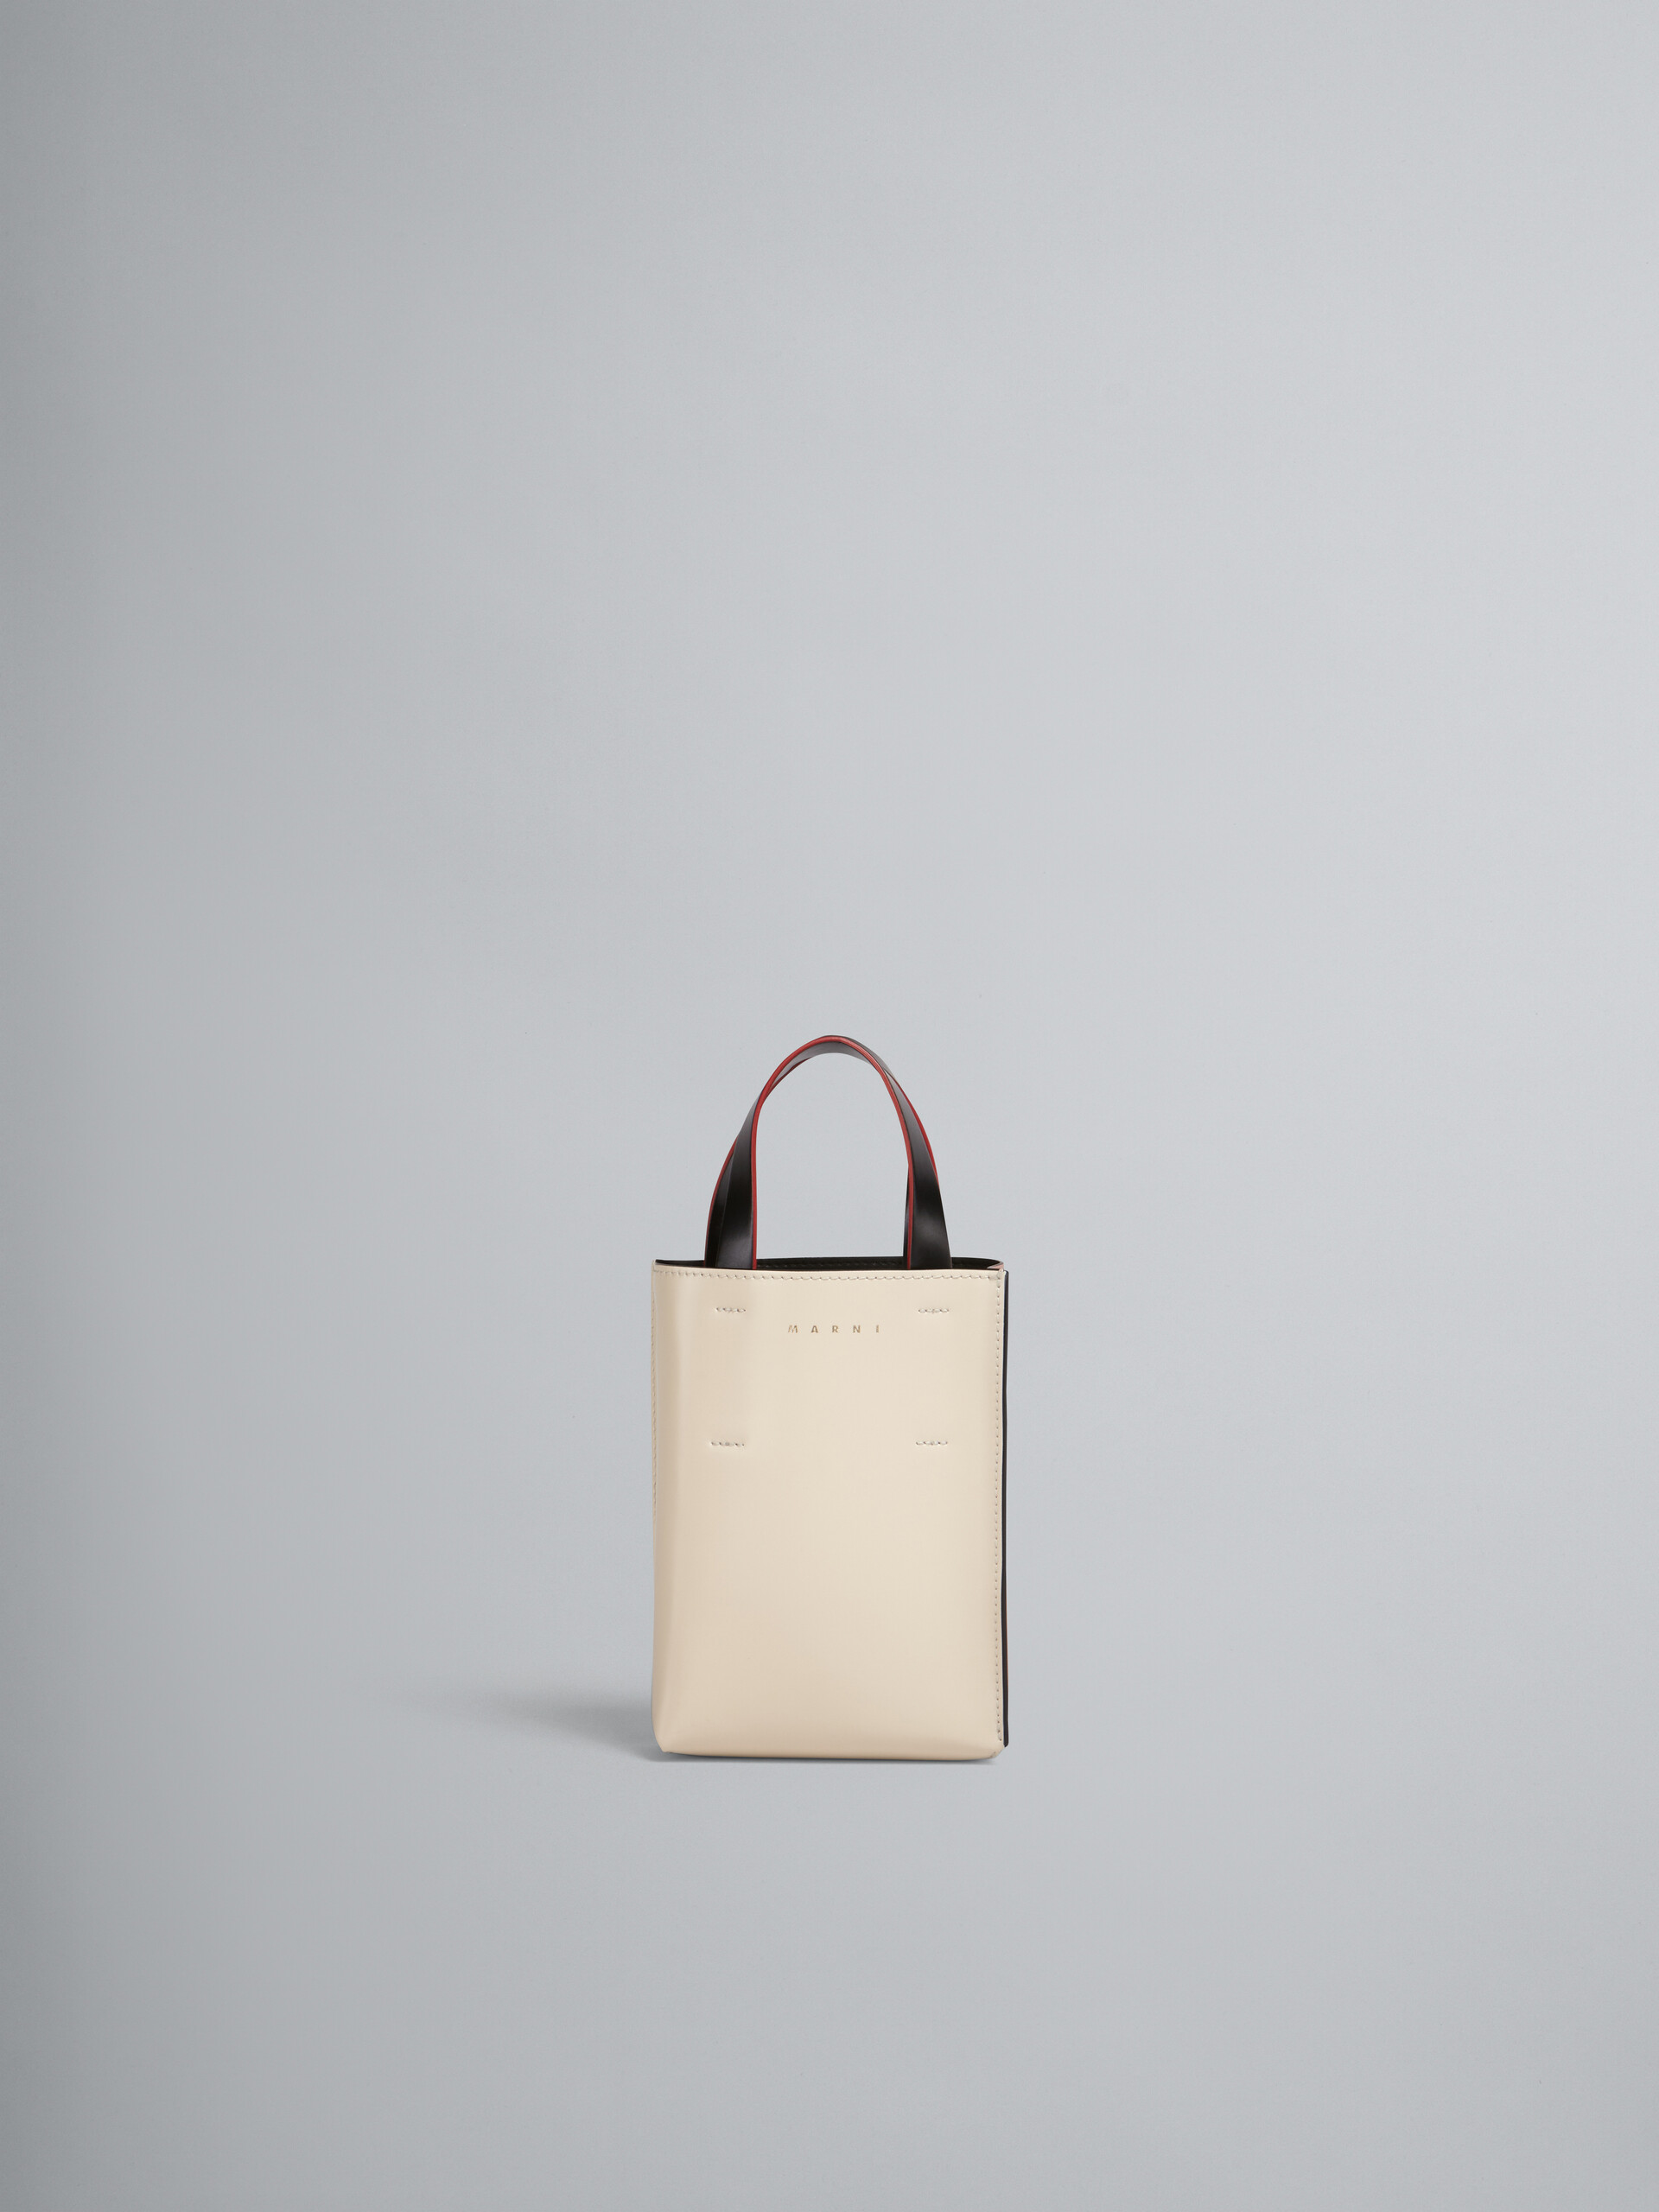 MUSEO nano bag in beige and pink shiny leather - Shopping Bags - Image 1